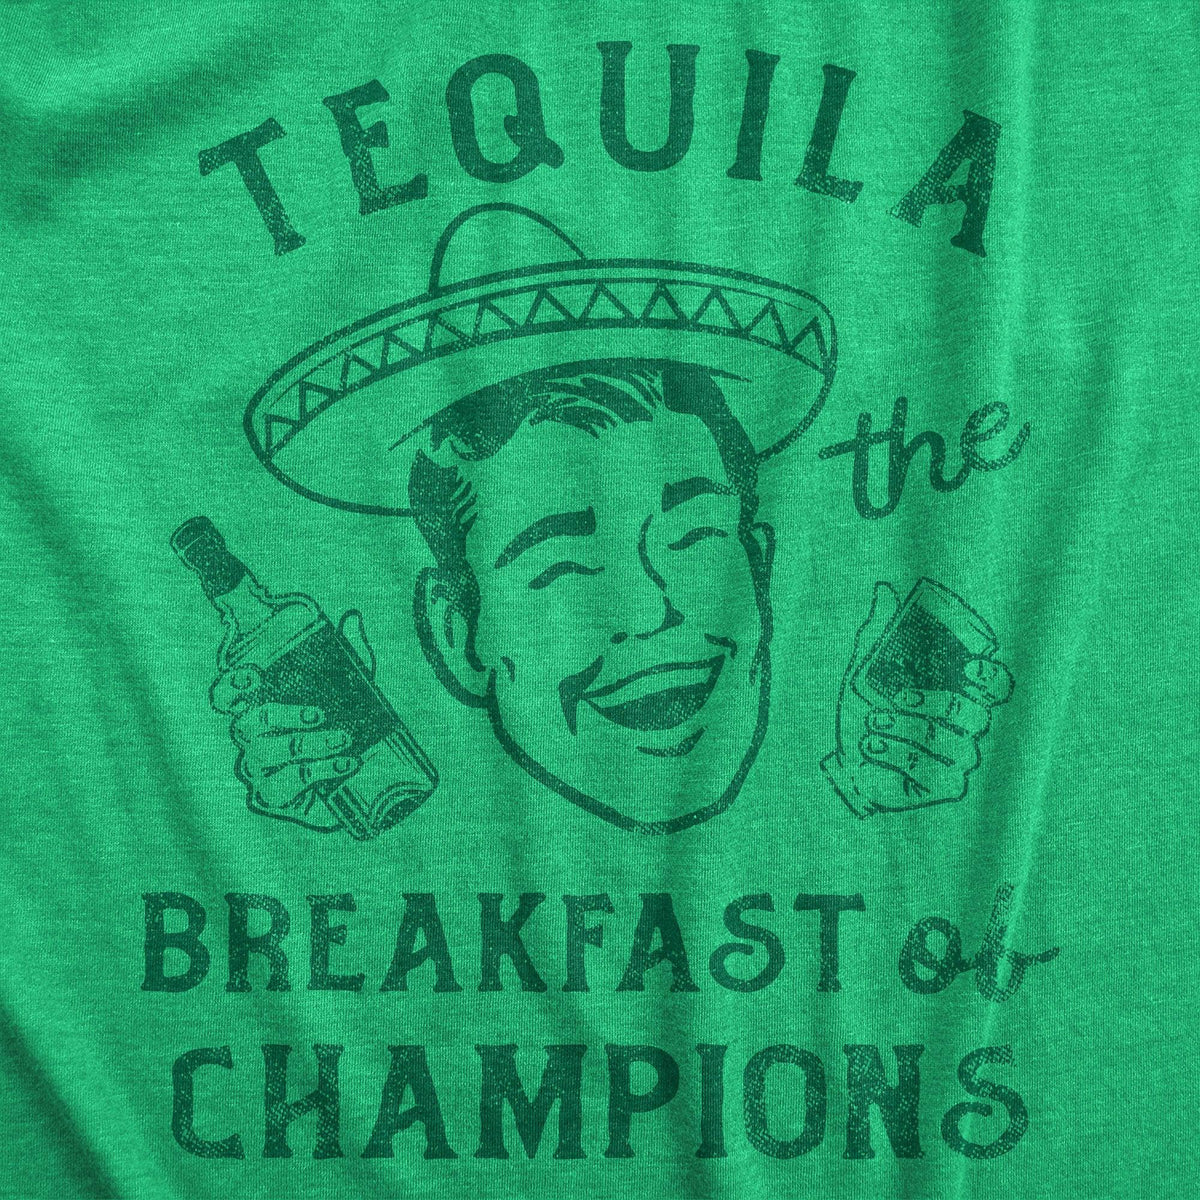 Tequila The Breakfast Of Champions Men&#39;s Tshirt  -  Crazy Dog T-Shirts